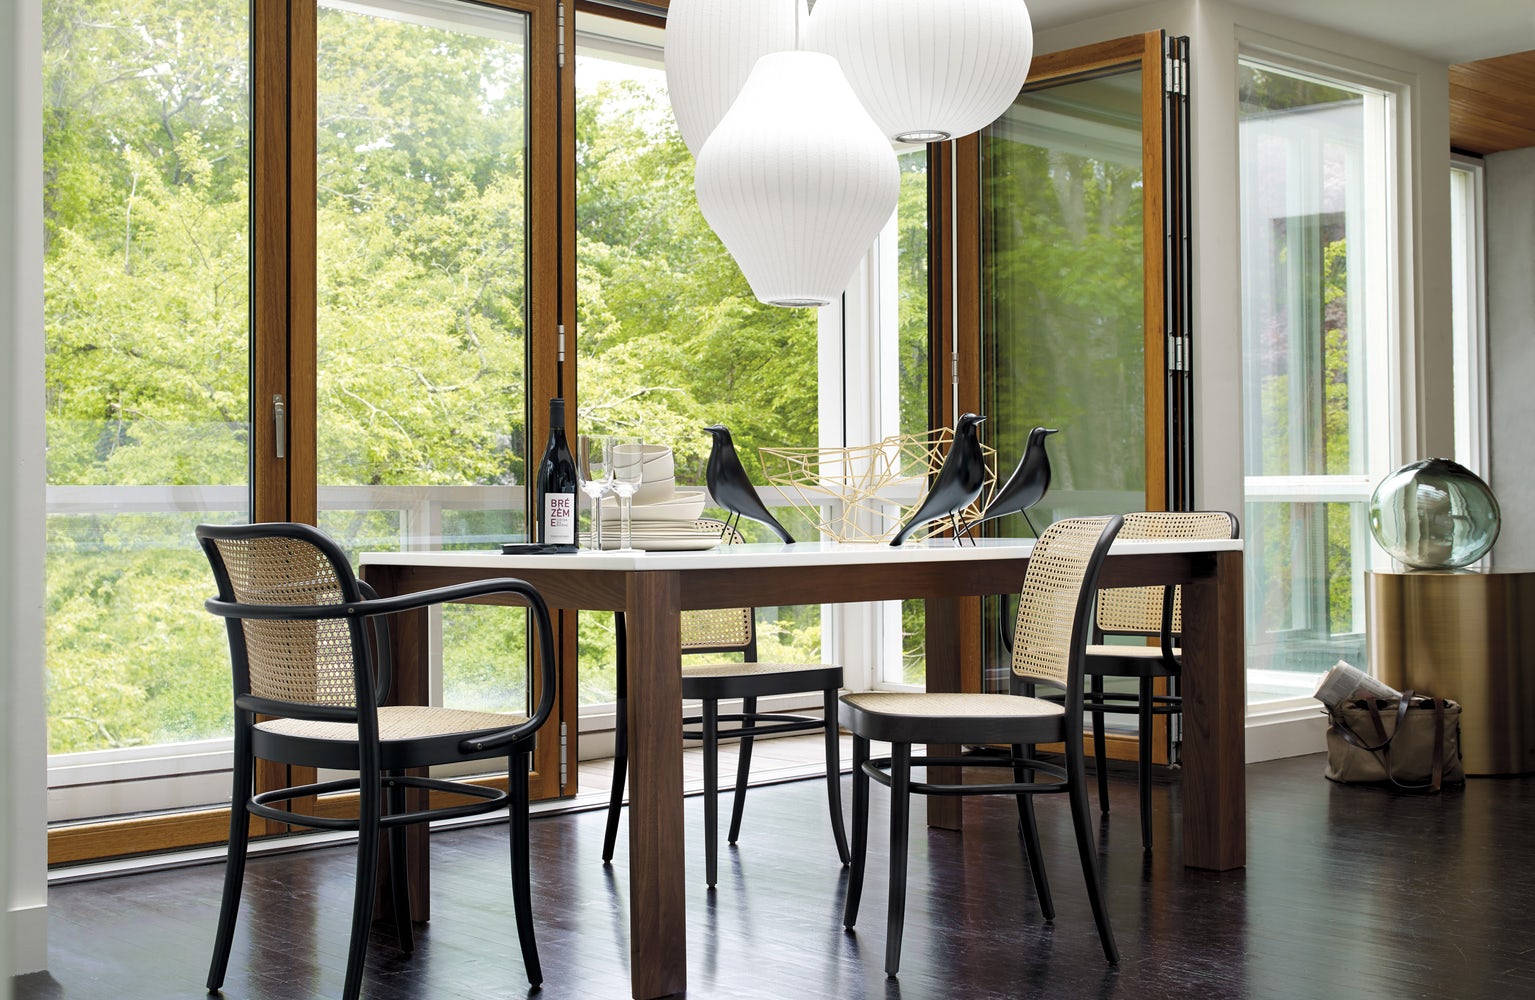 Thonet Sale now on! 20% off RRP on entire Thonet collection, available at designcraft Canberra